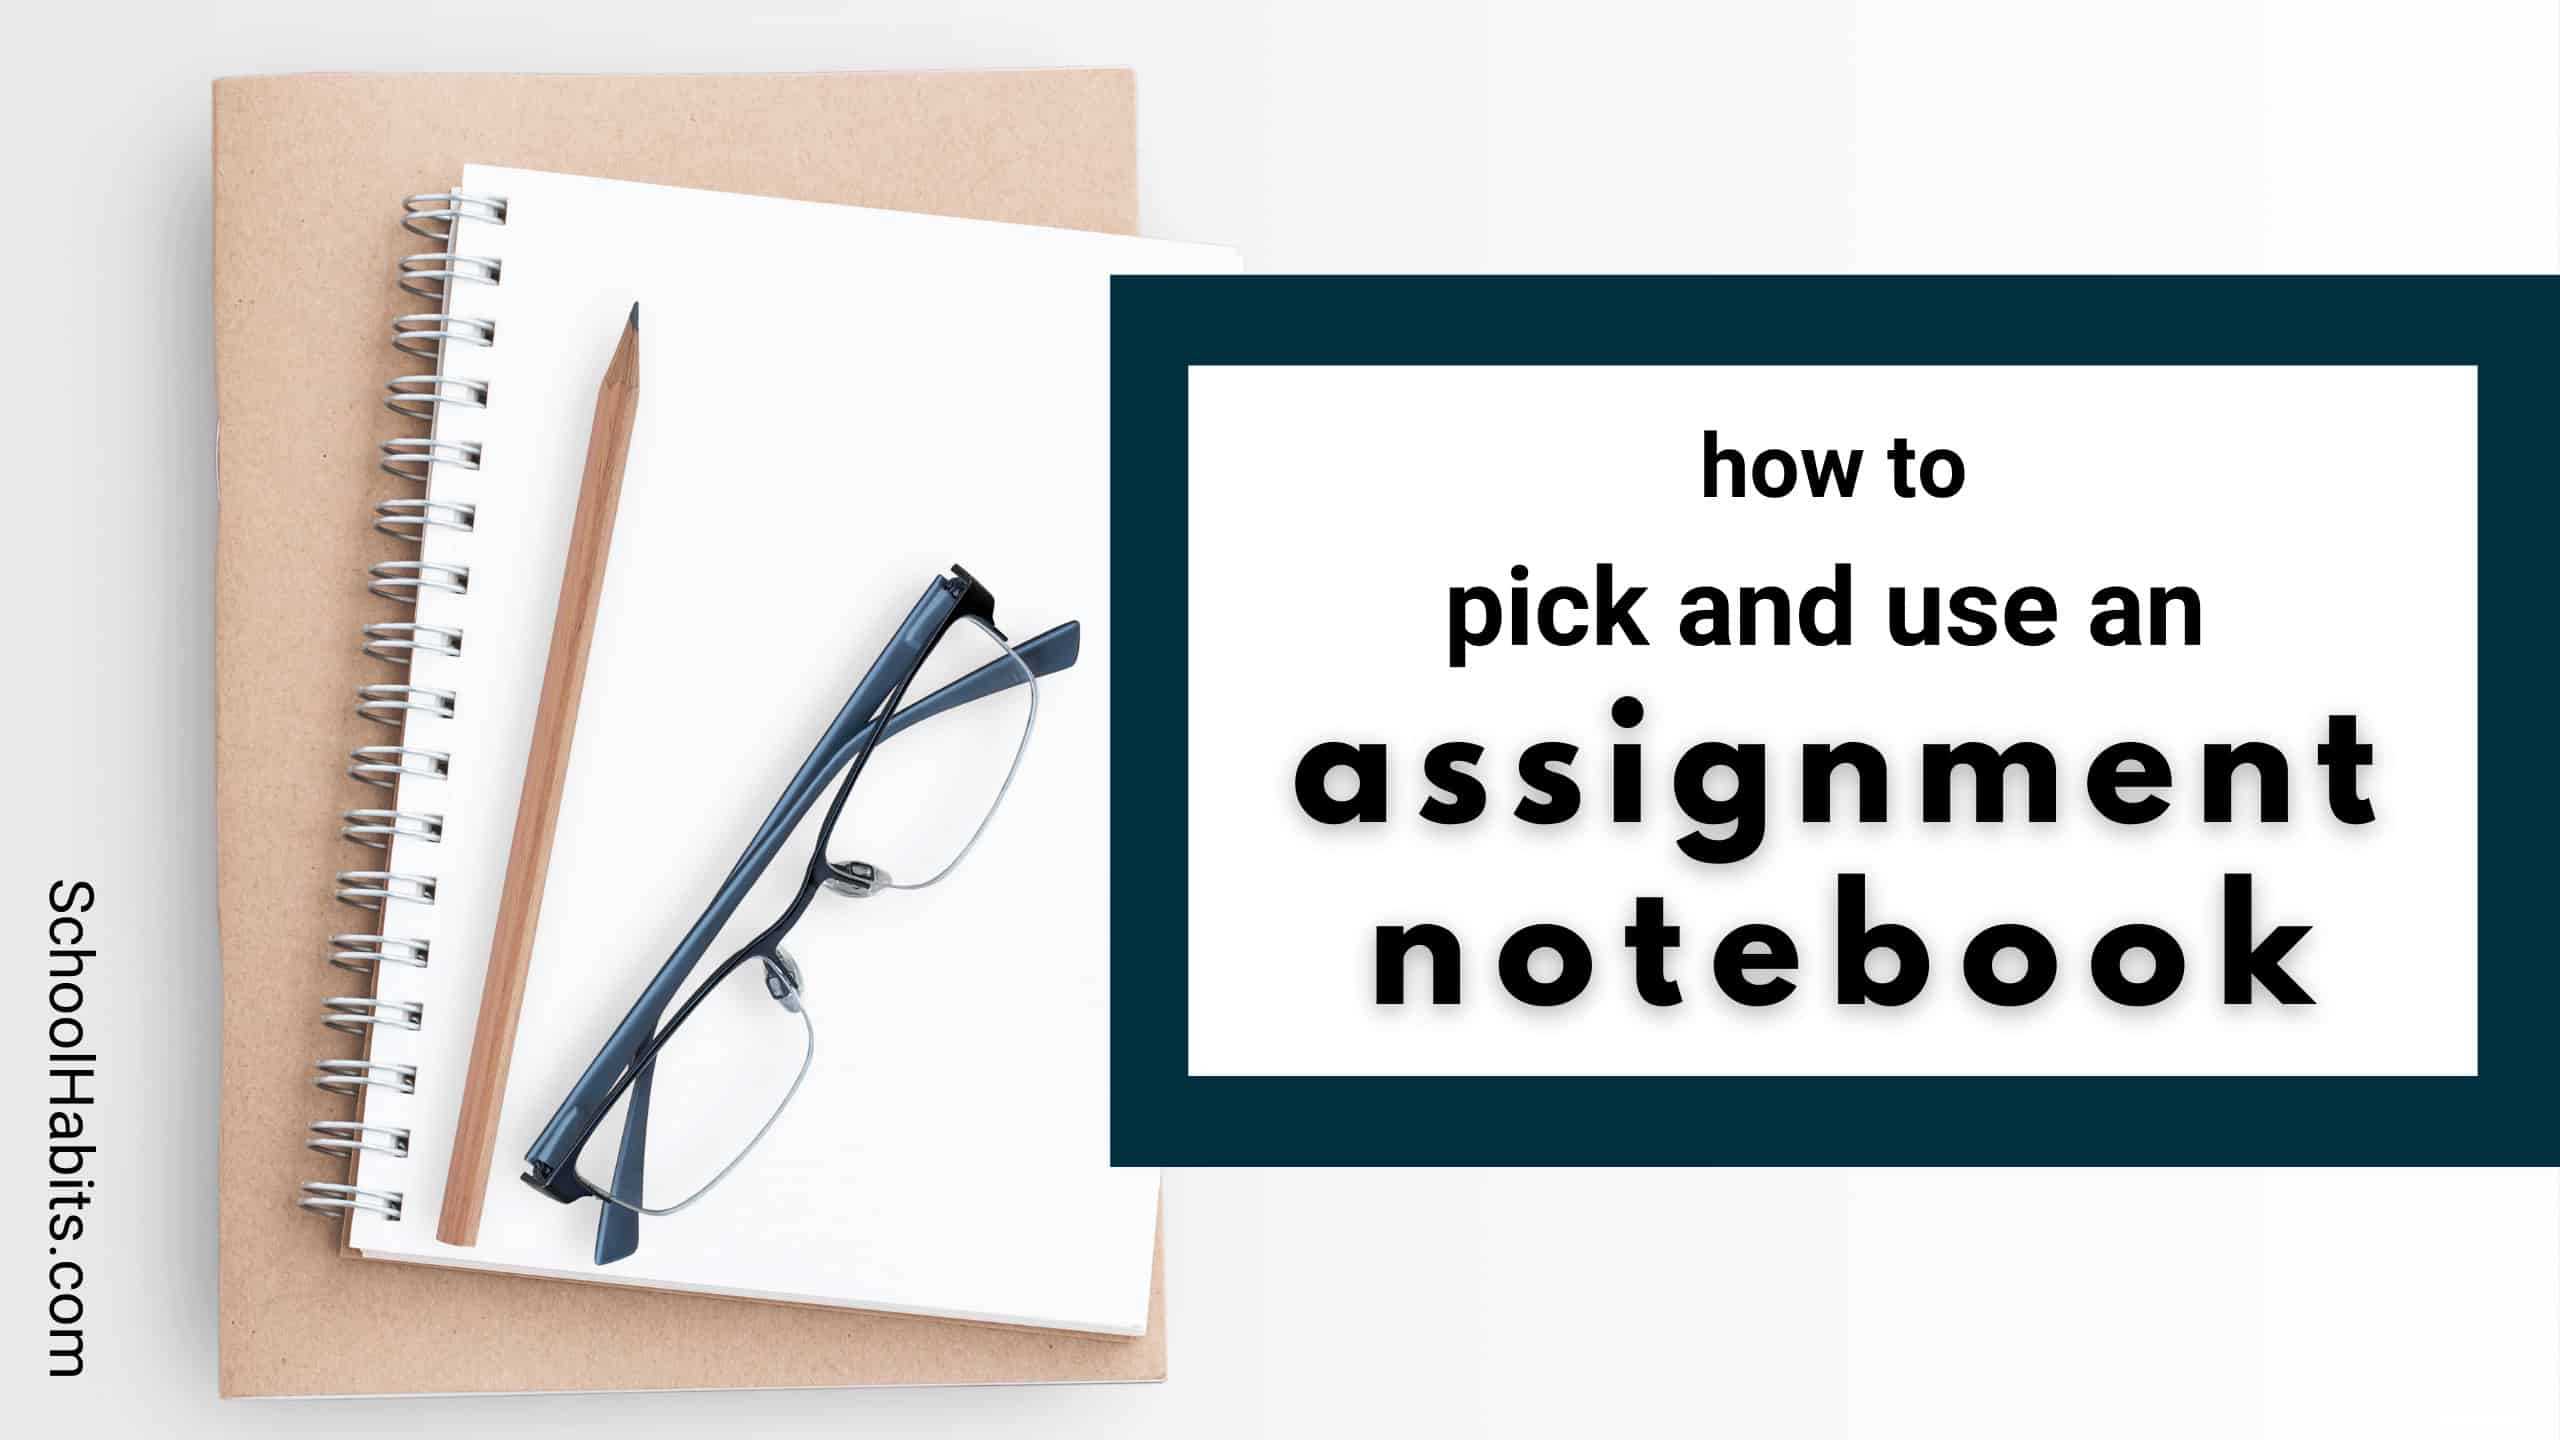 the assignment notebook